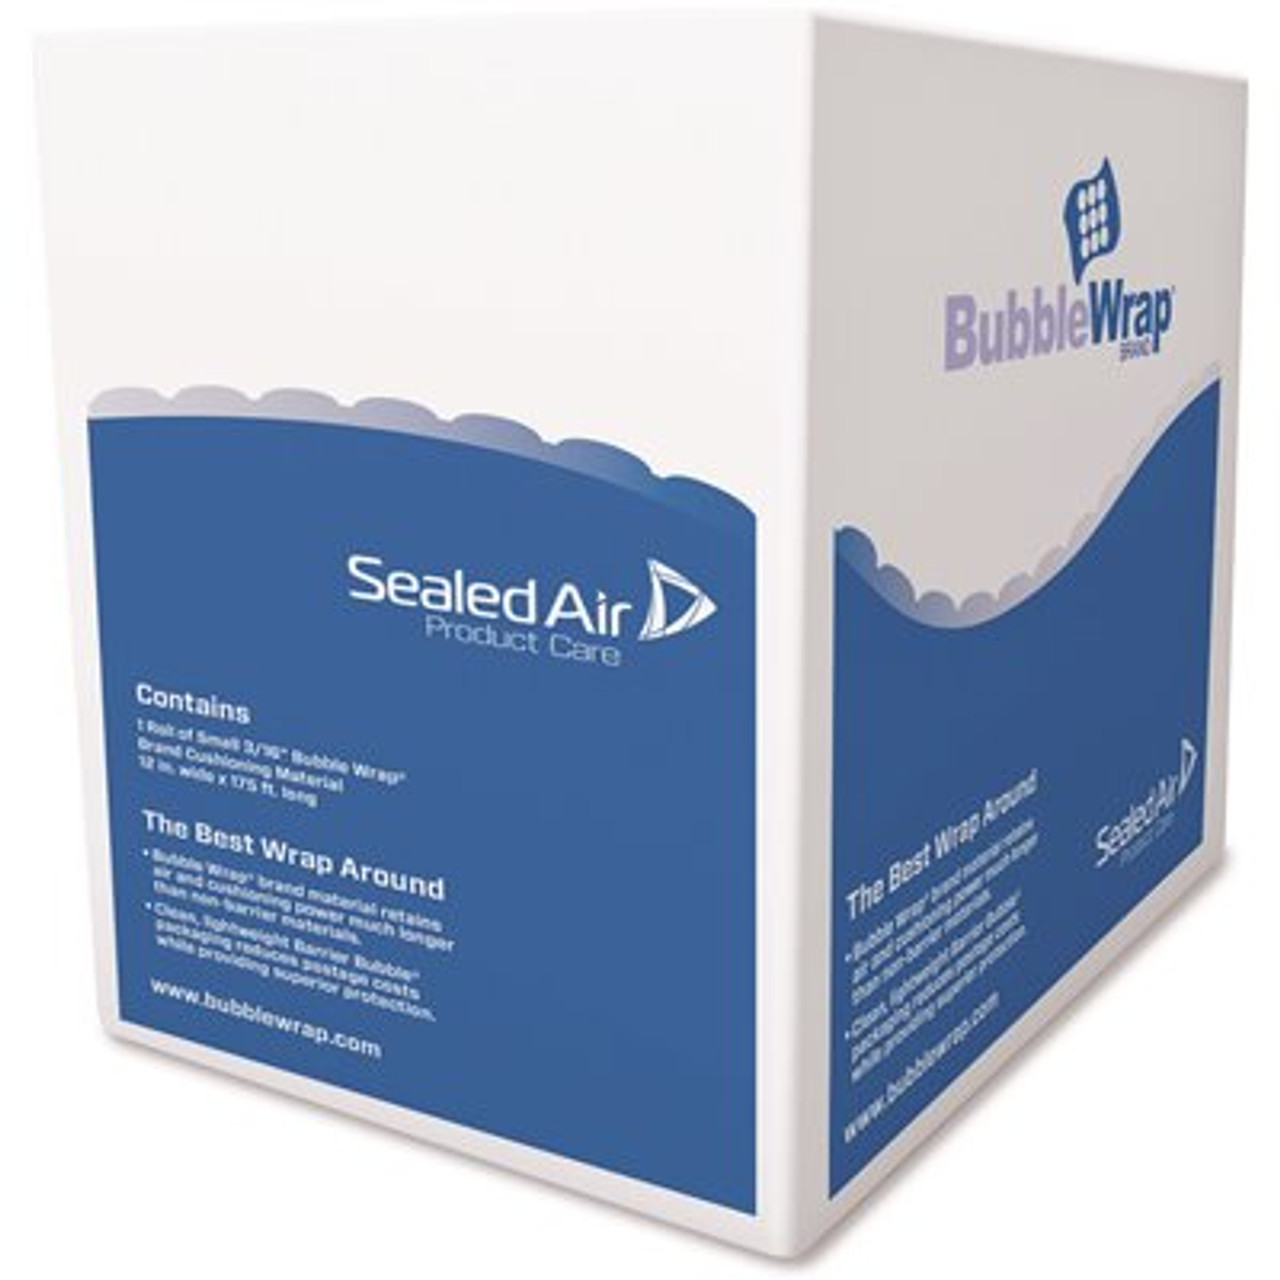 Sealed Air 3/16 in. Thick, 12 in. x 175 ft. Bubble Wrap Cushioning Material in Dispenser Box